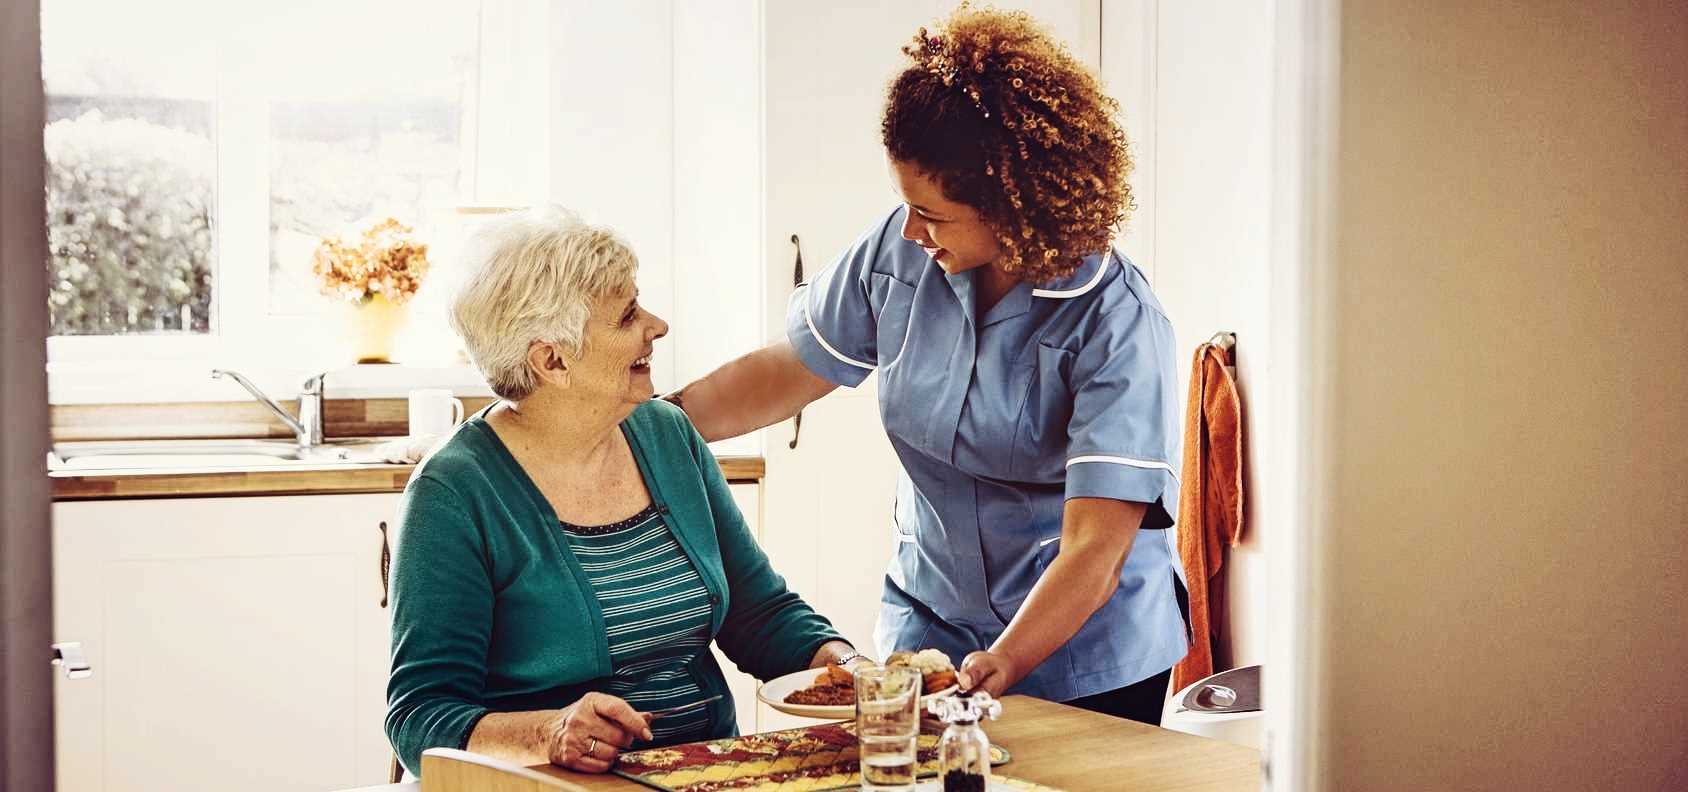 In-home caregiver provides assistance to senior living at home